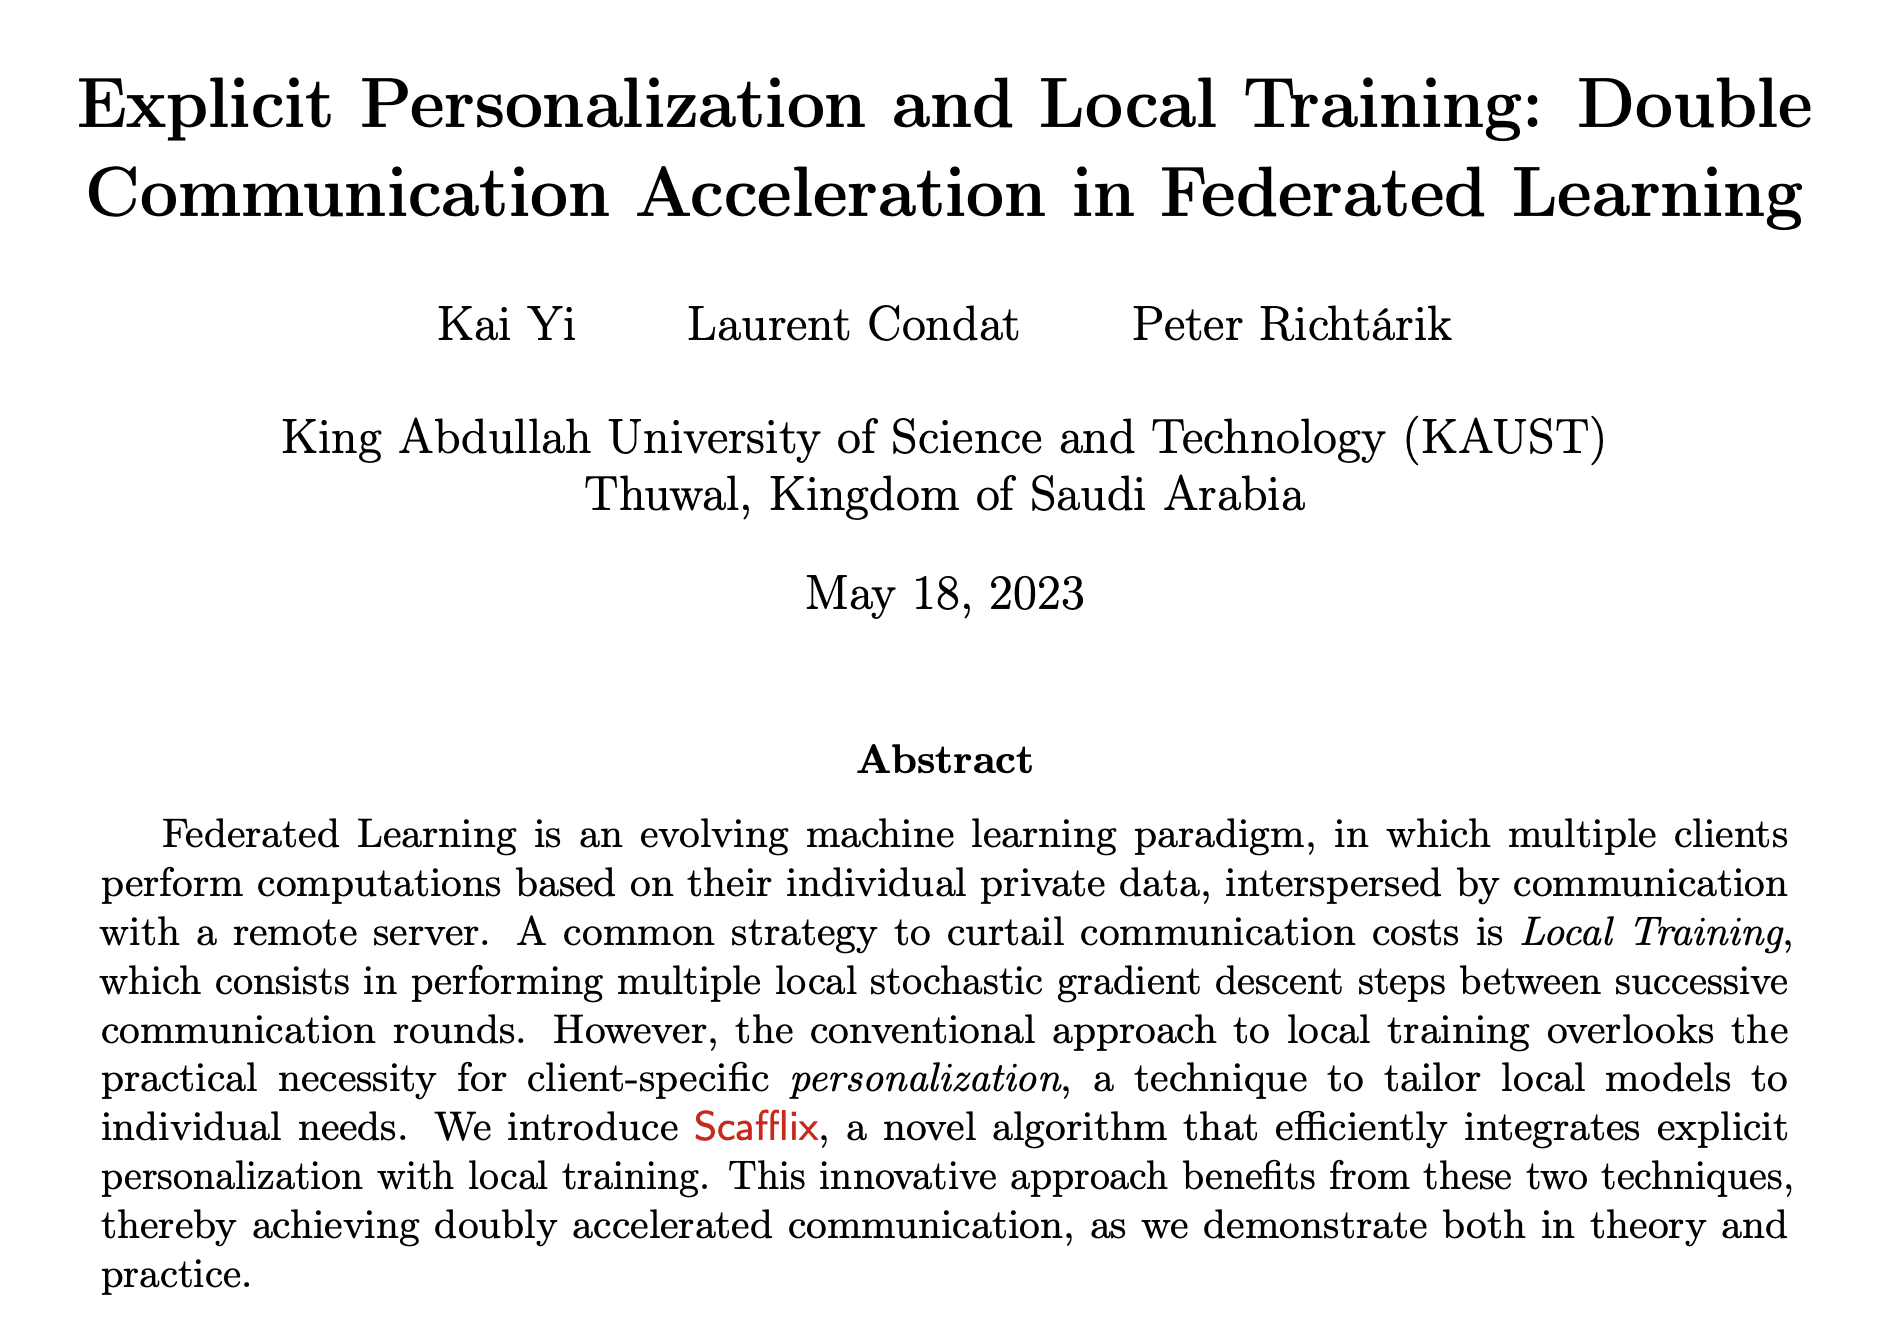 Explicit Personalization and Local Training: Double Communication Acceleration in Federated Learning